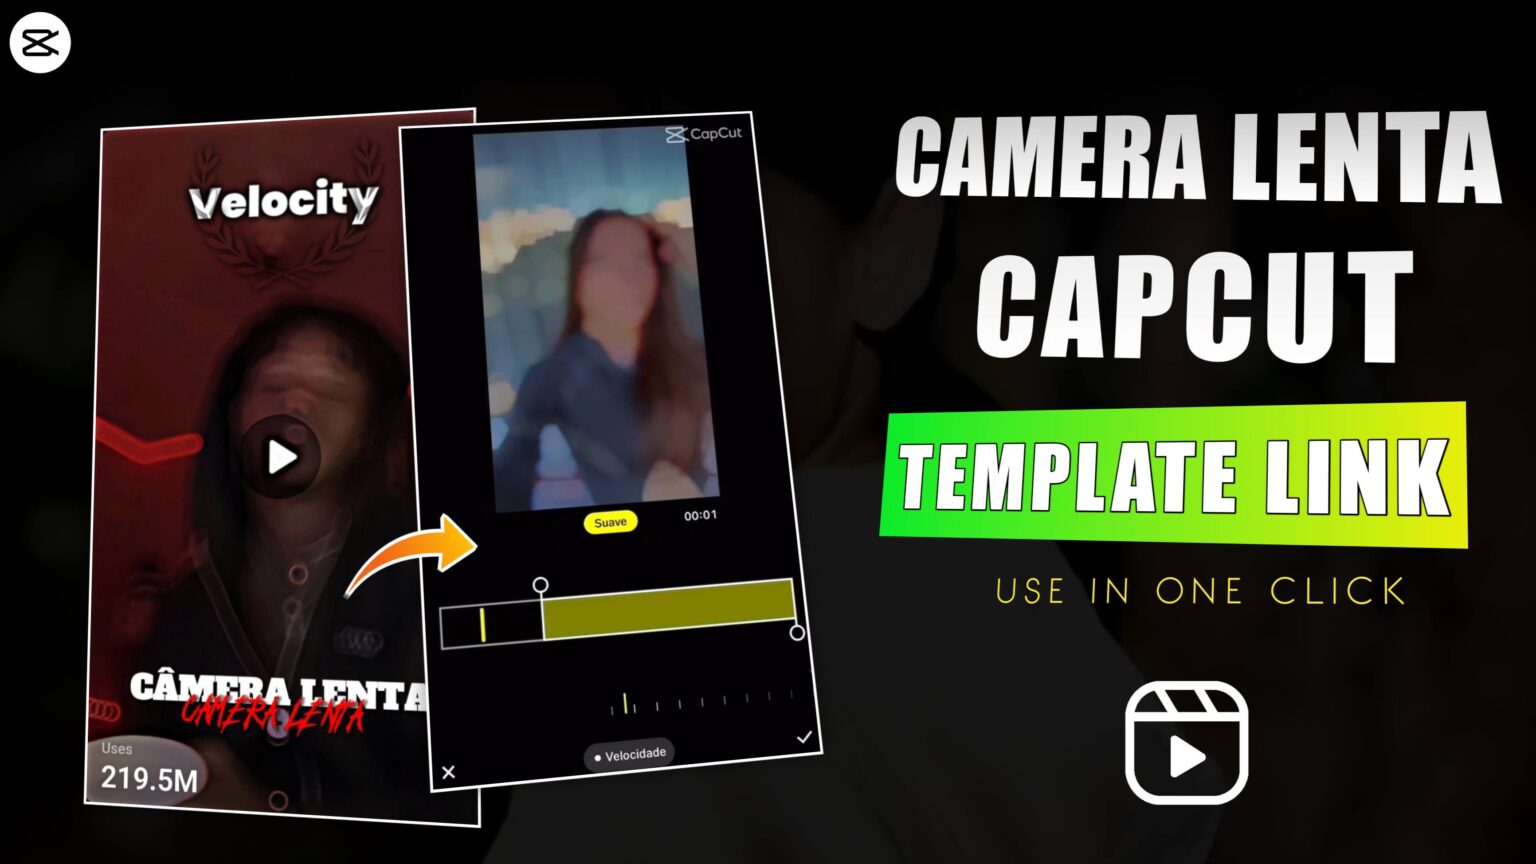 enhance-your-creativity-with-the-iphone-camera-anh-capcut-template-kworld-trend